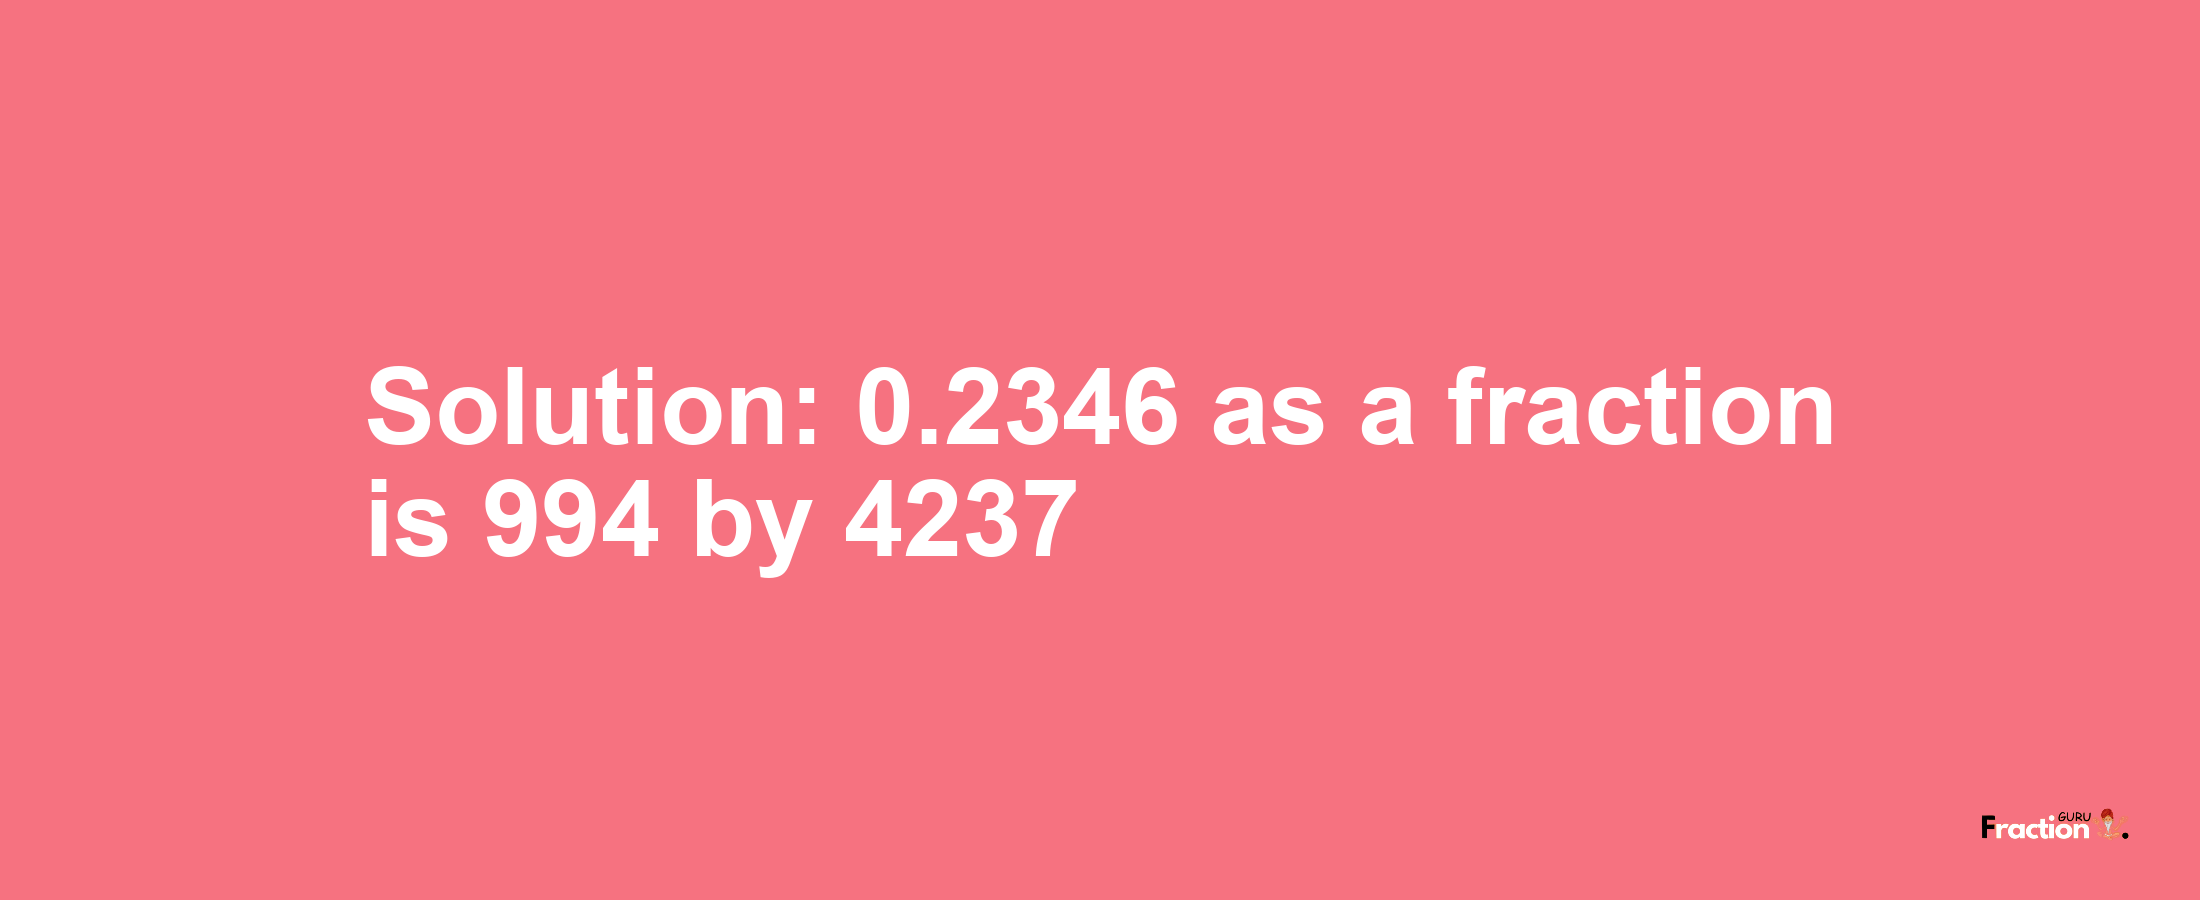 Solution:0.2346 as a fraction is 994/4237